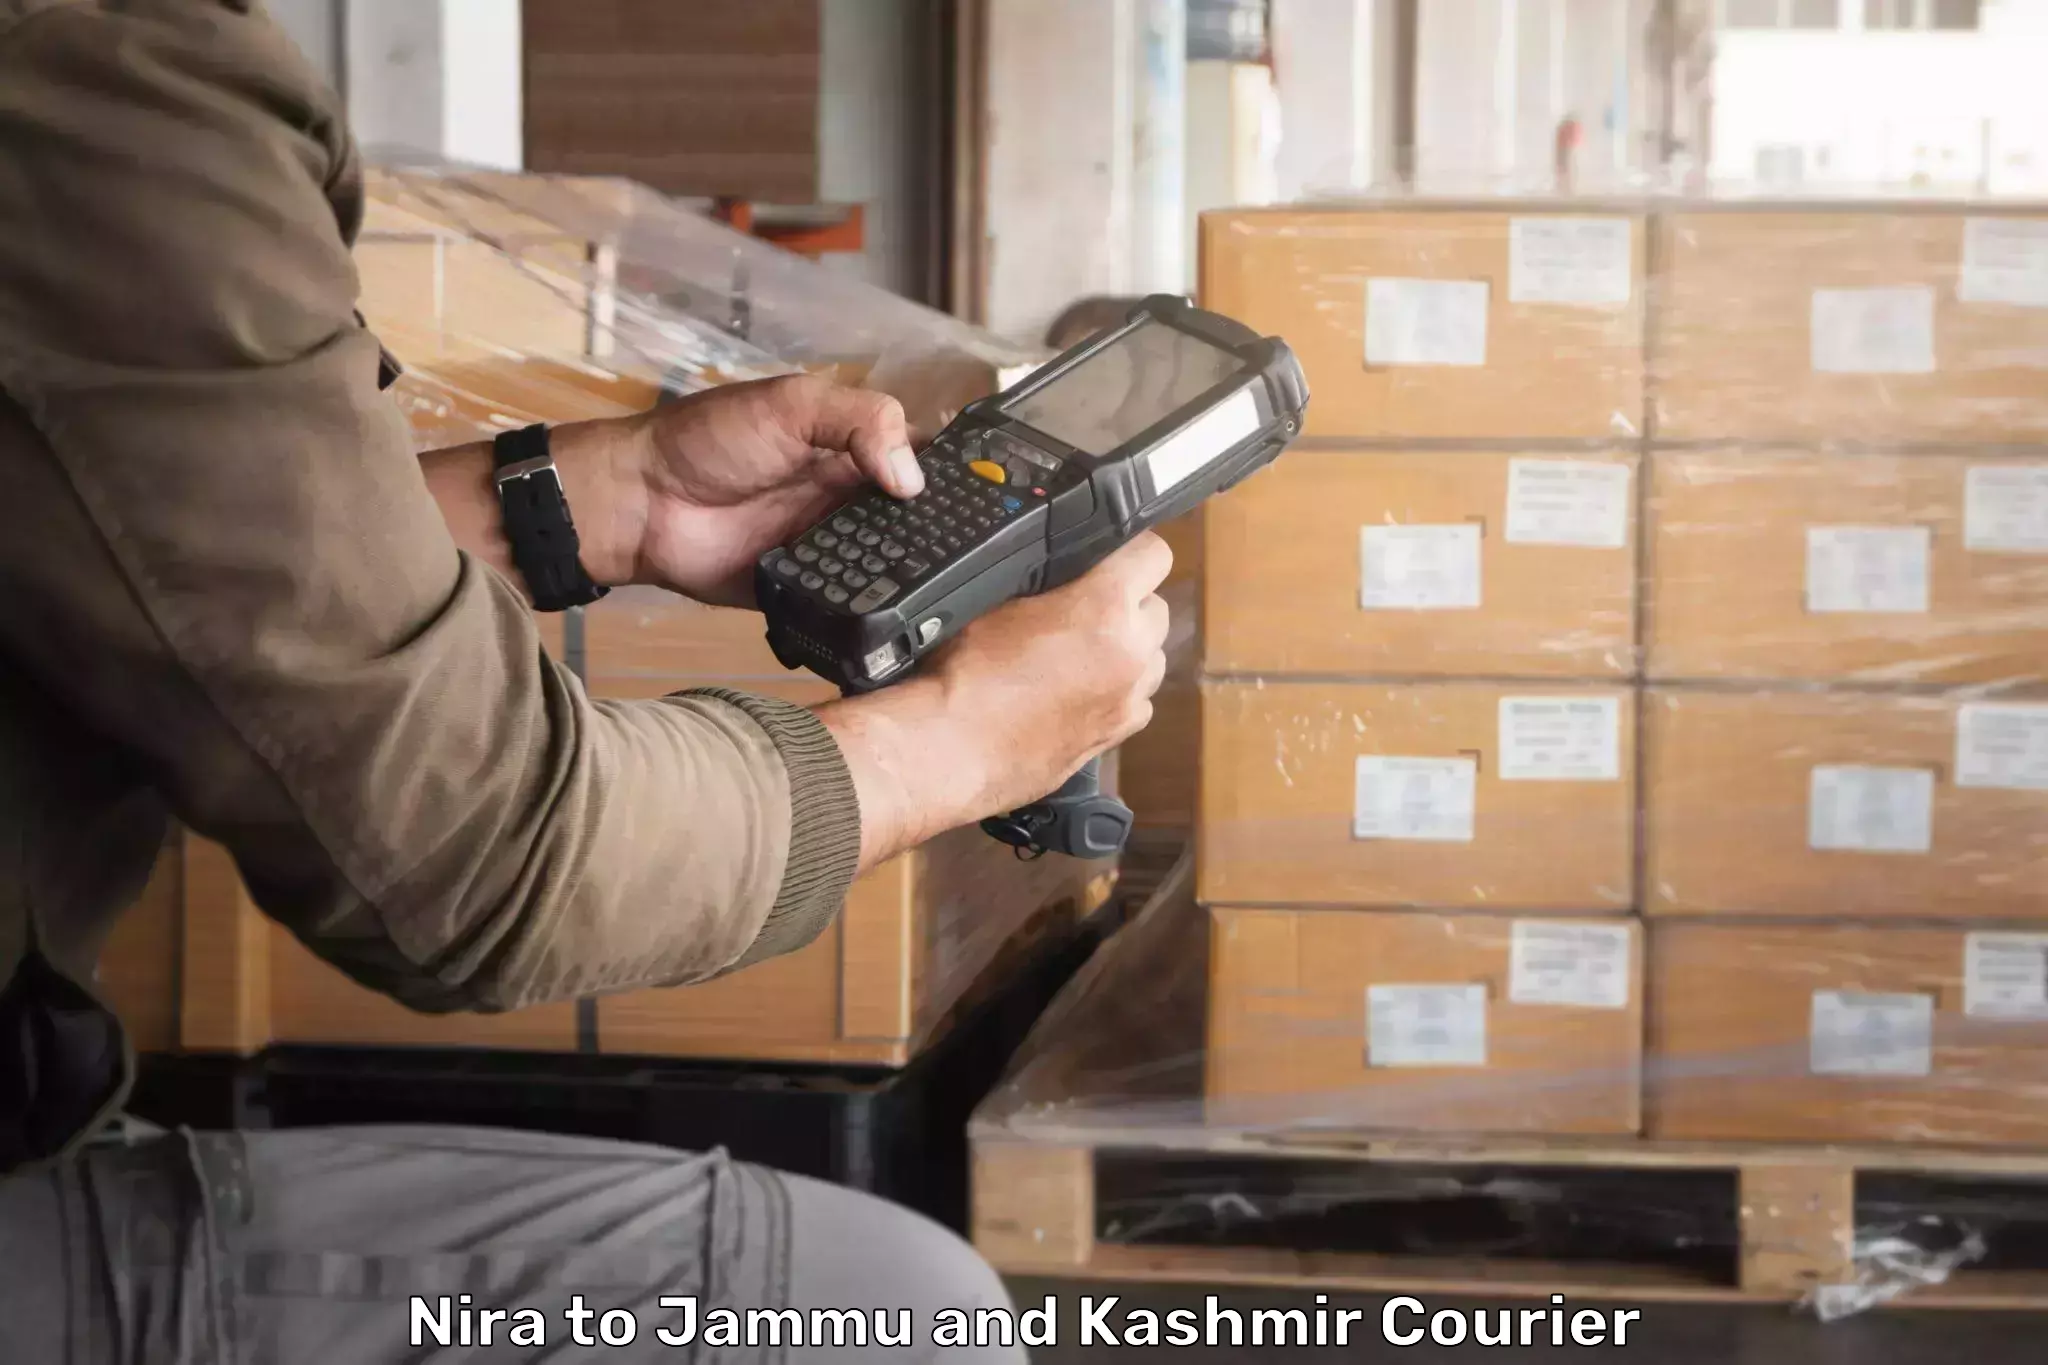 Express delivery network Nira to Pulwama